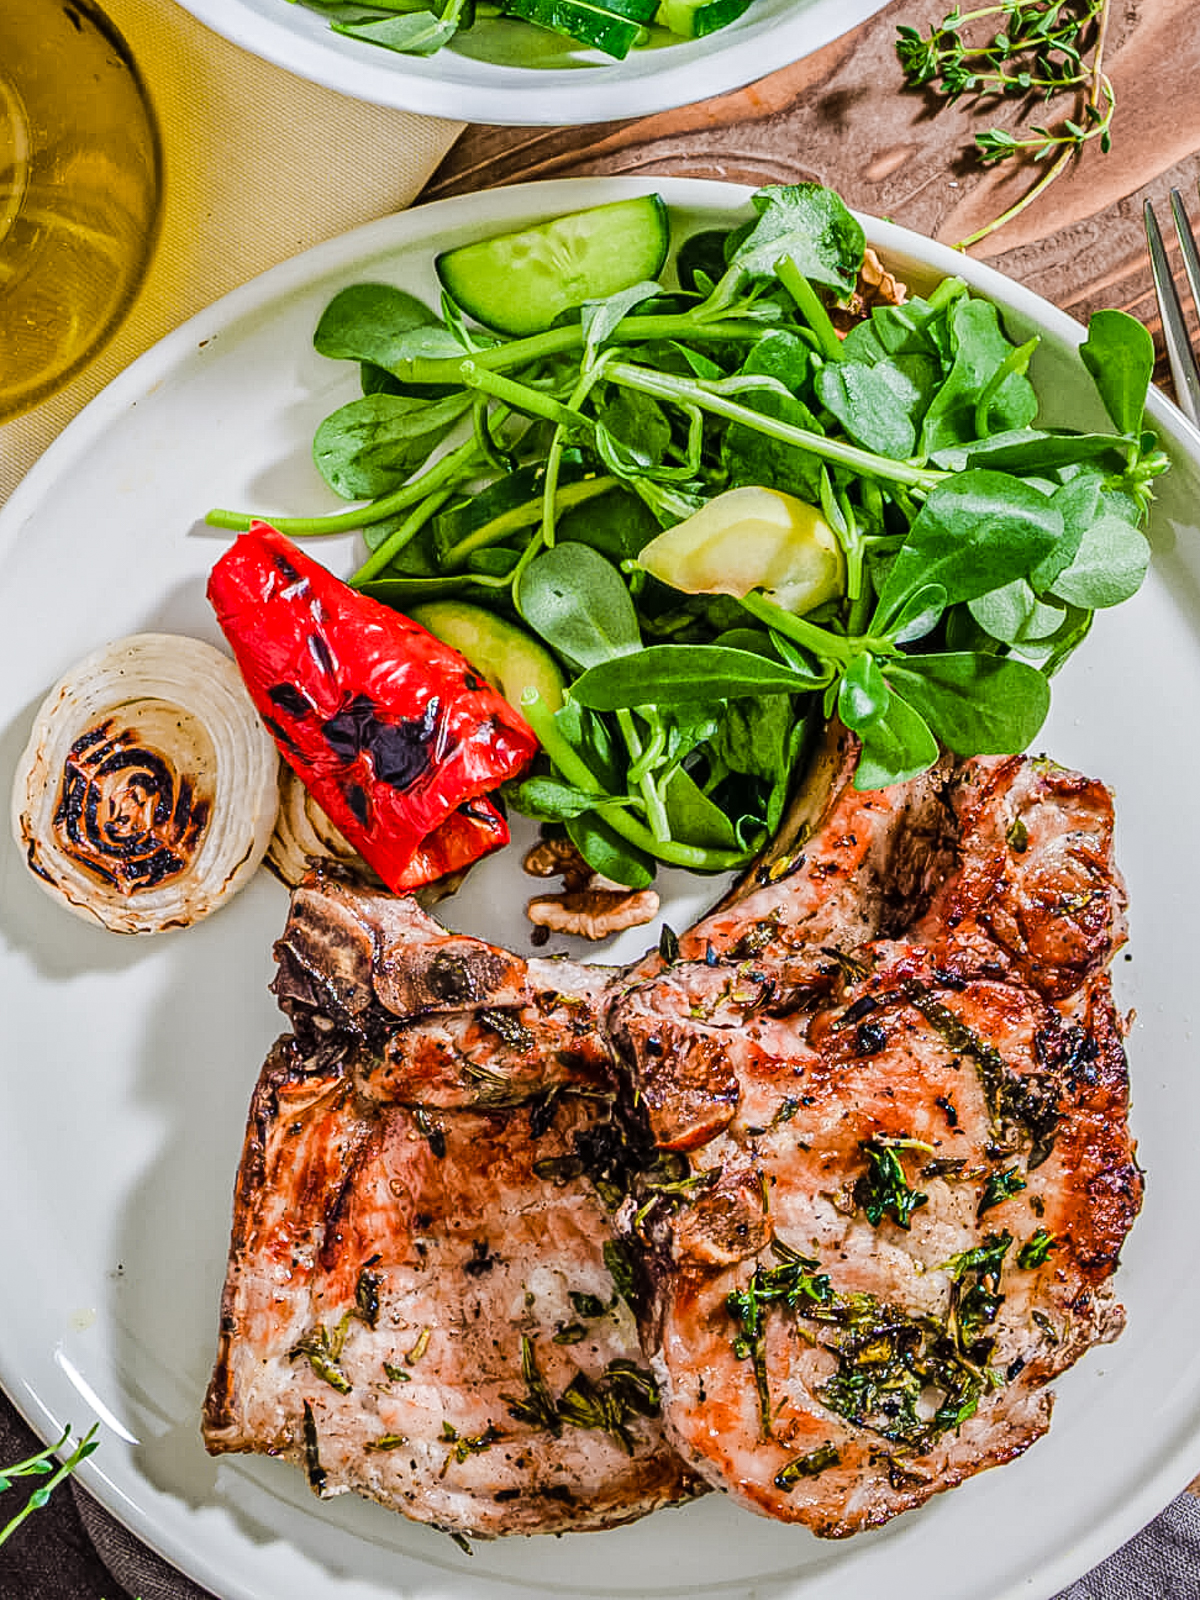 rosemary pork chops with salad on a plate